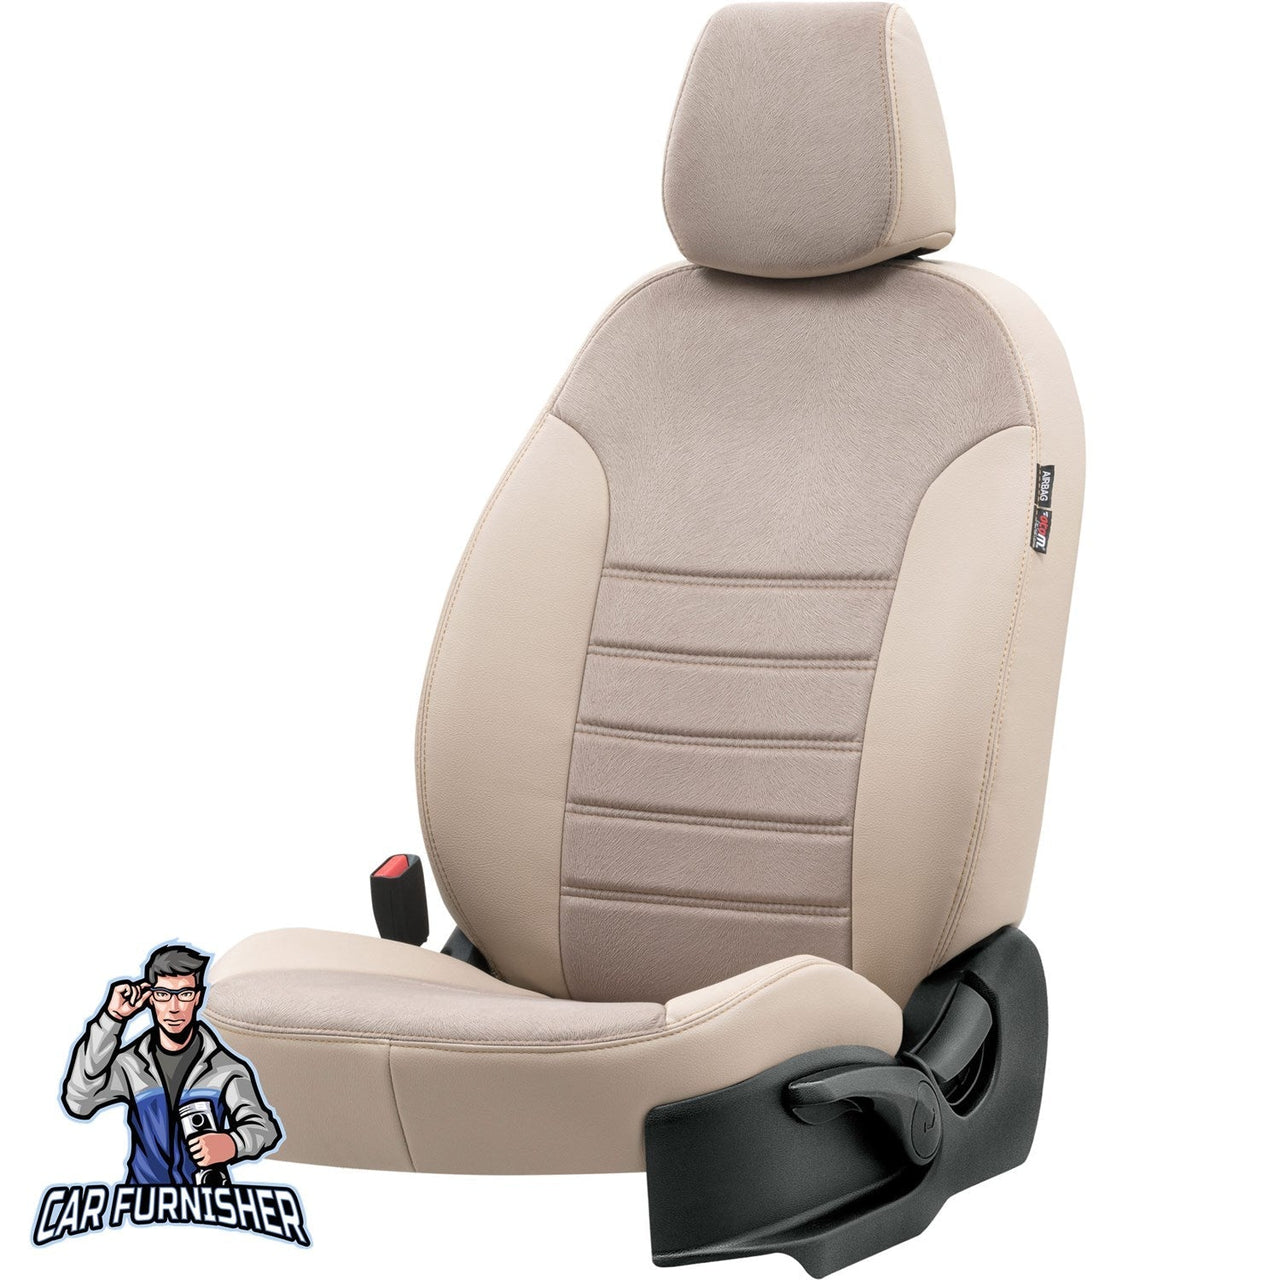 Volkswagen Touareg Seat Cover London Foal Feather Design Beige Leather & Foal Feather